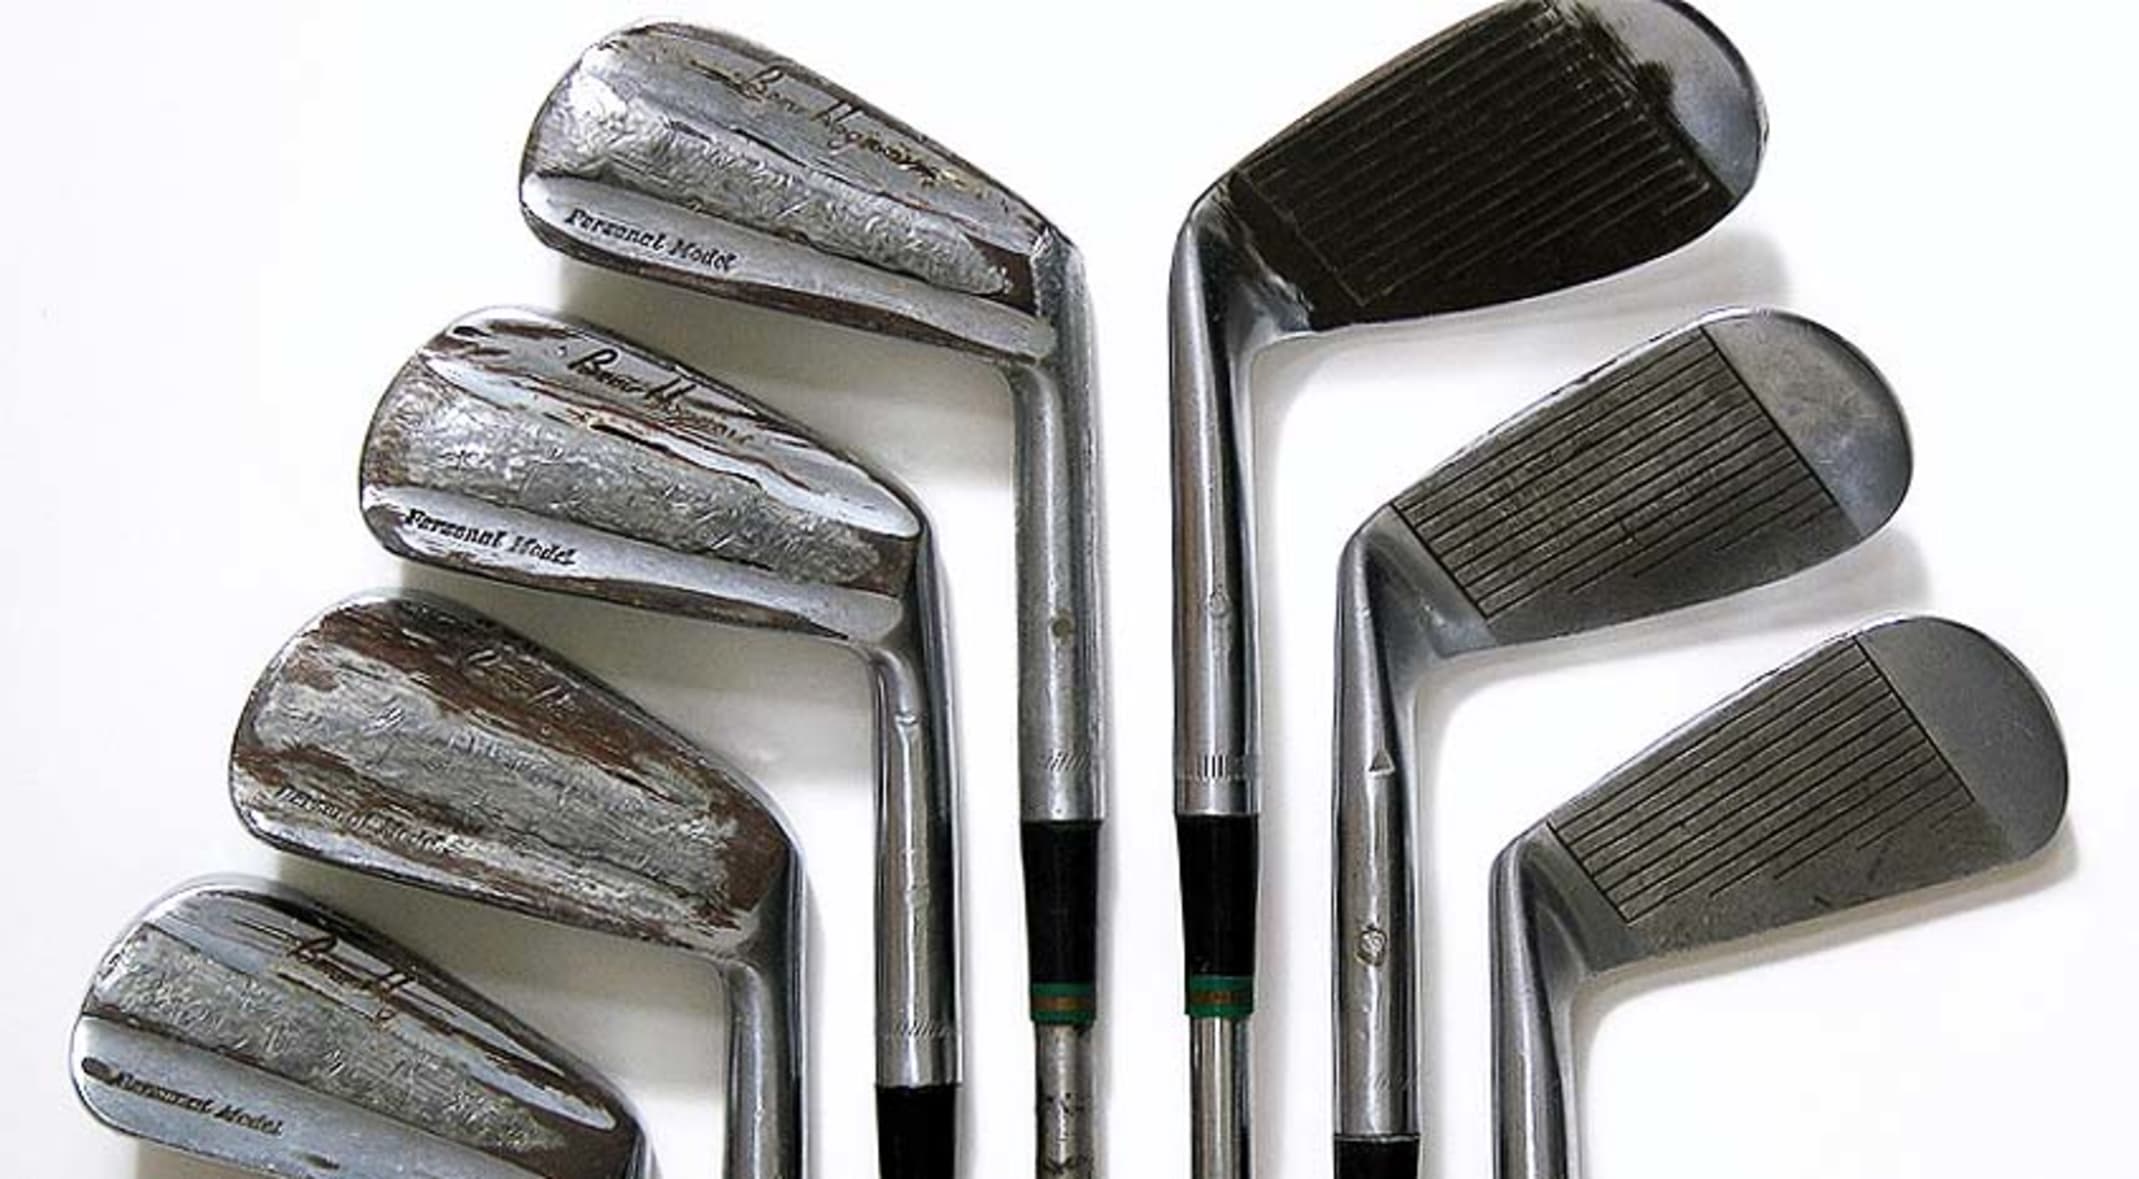 Hogan's '53 iron is up for